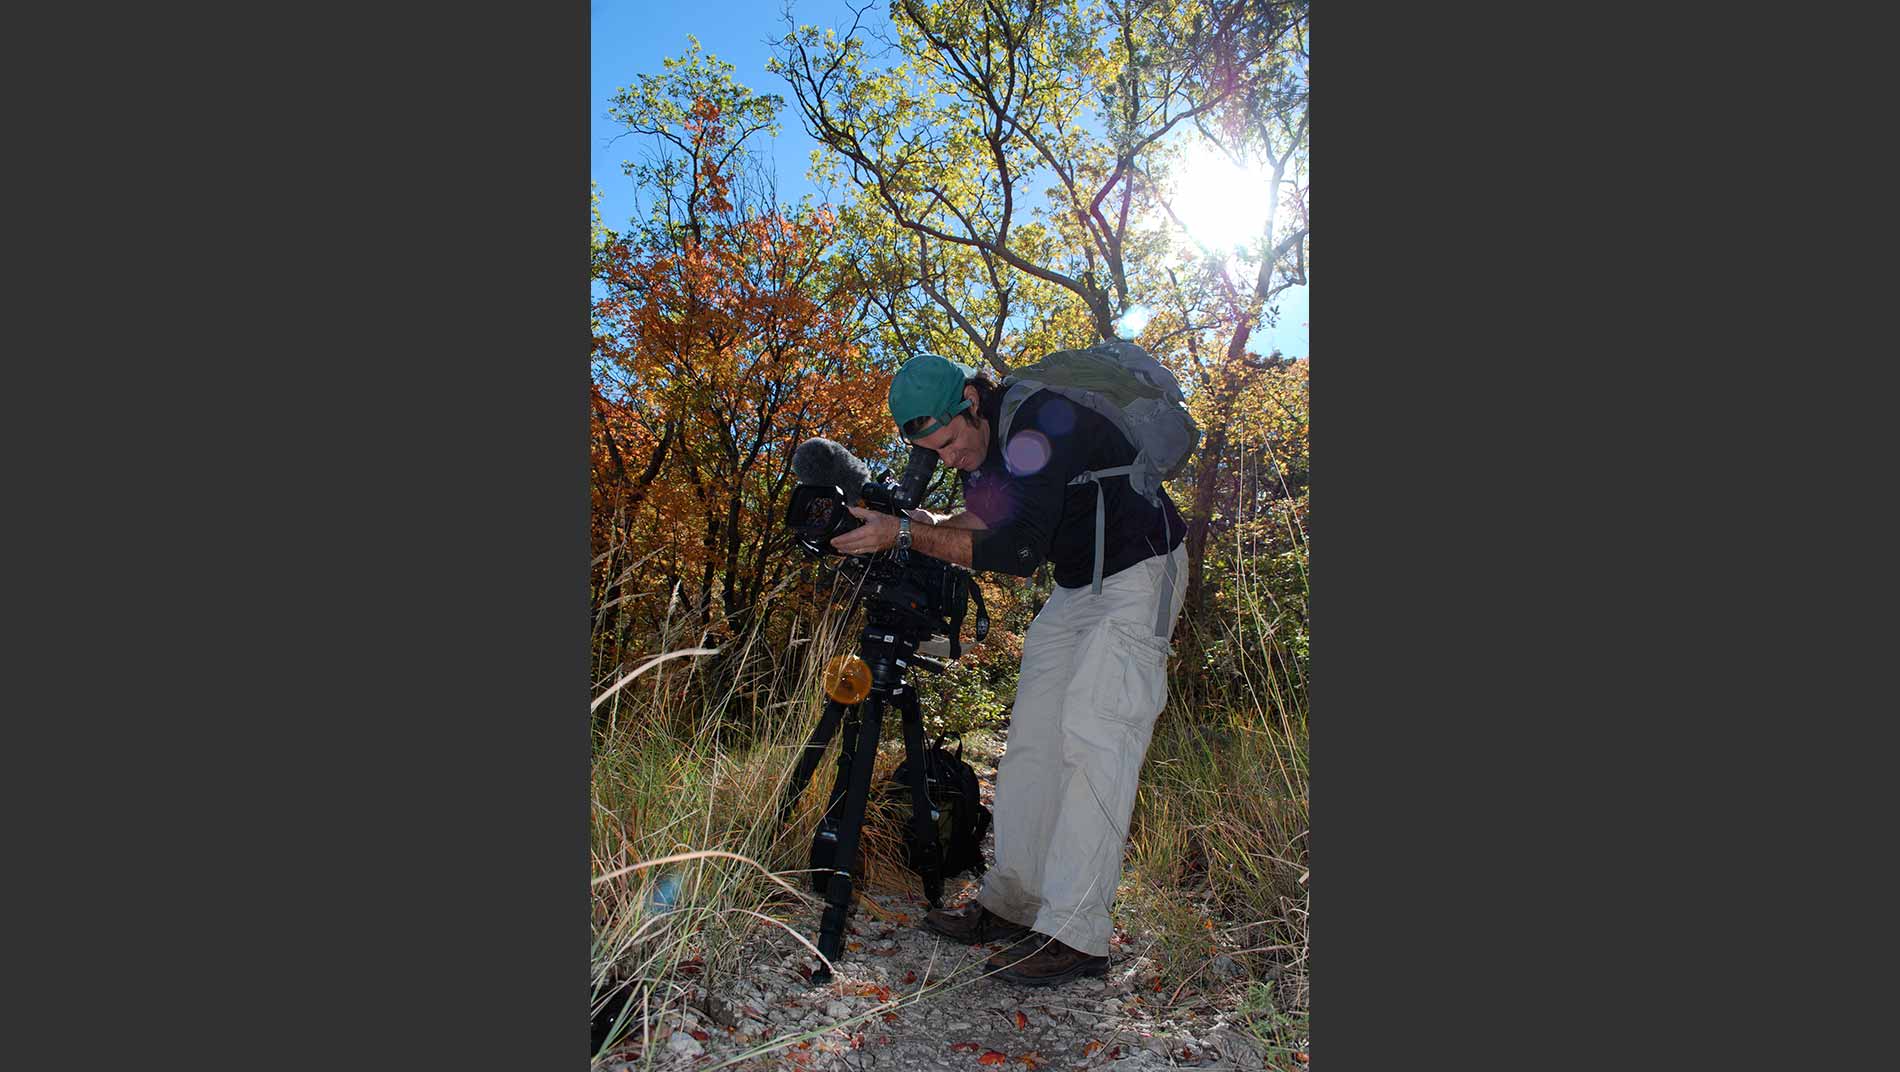 Abe Moore shoots the fall colors at Guadalupe Mountains National Park.